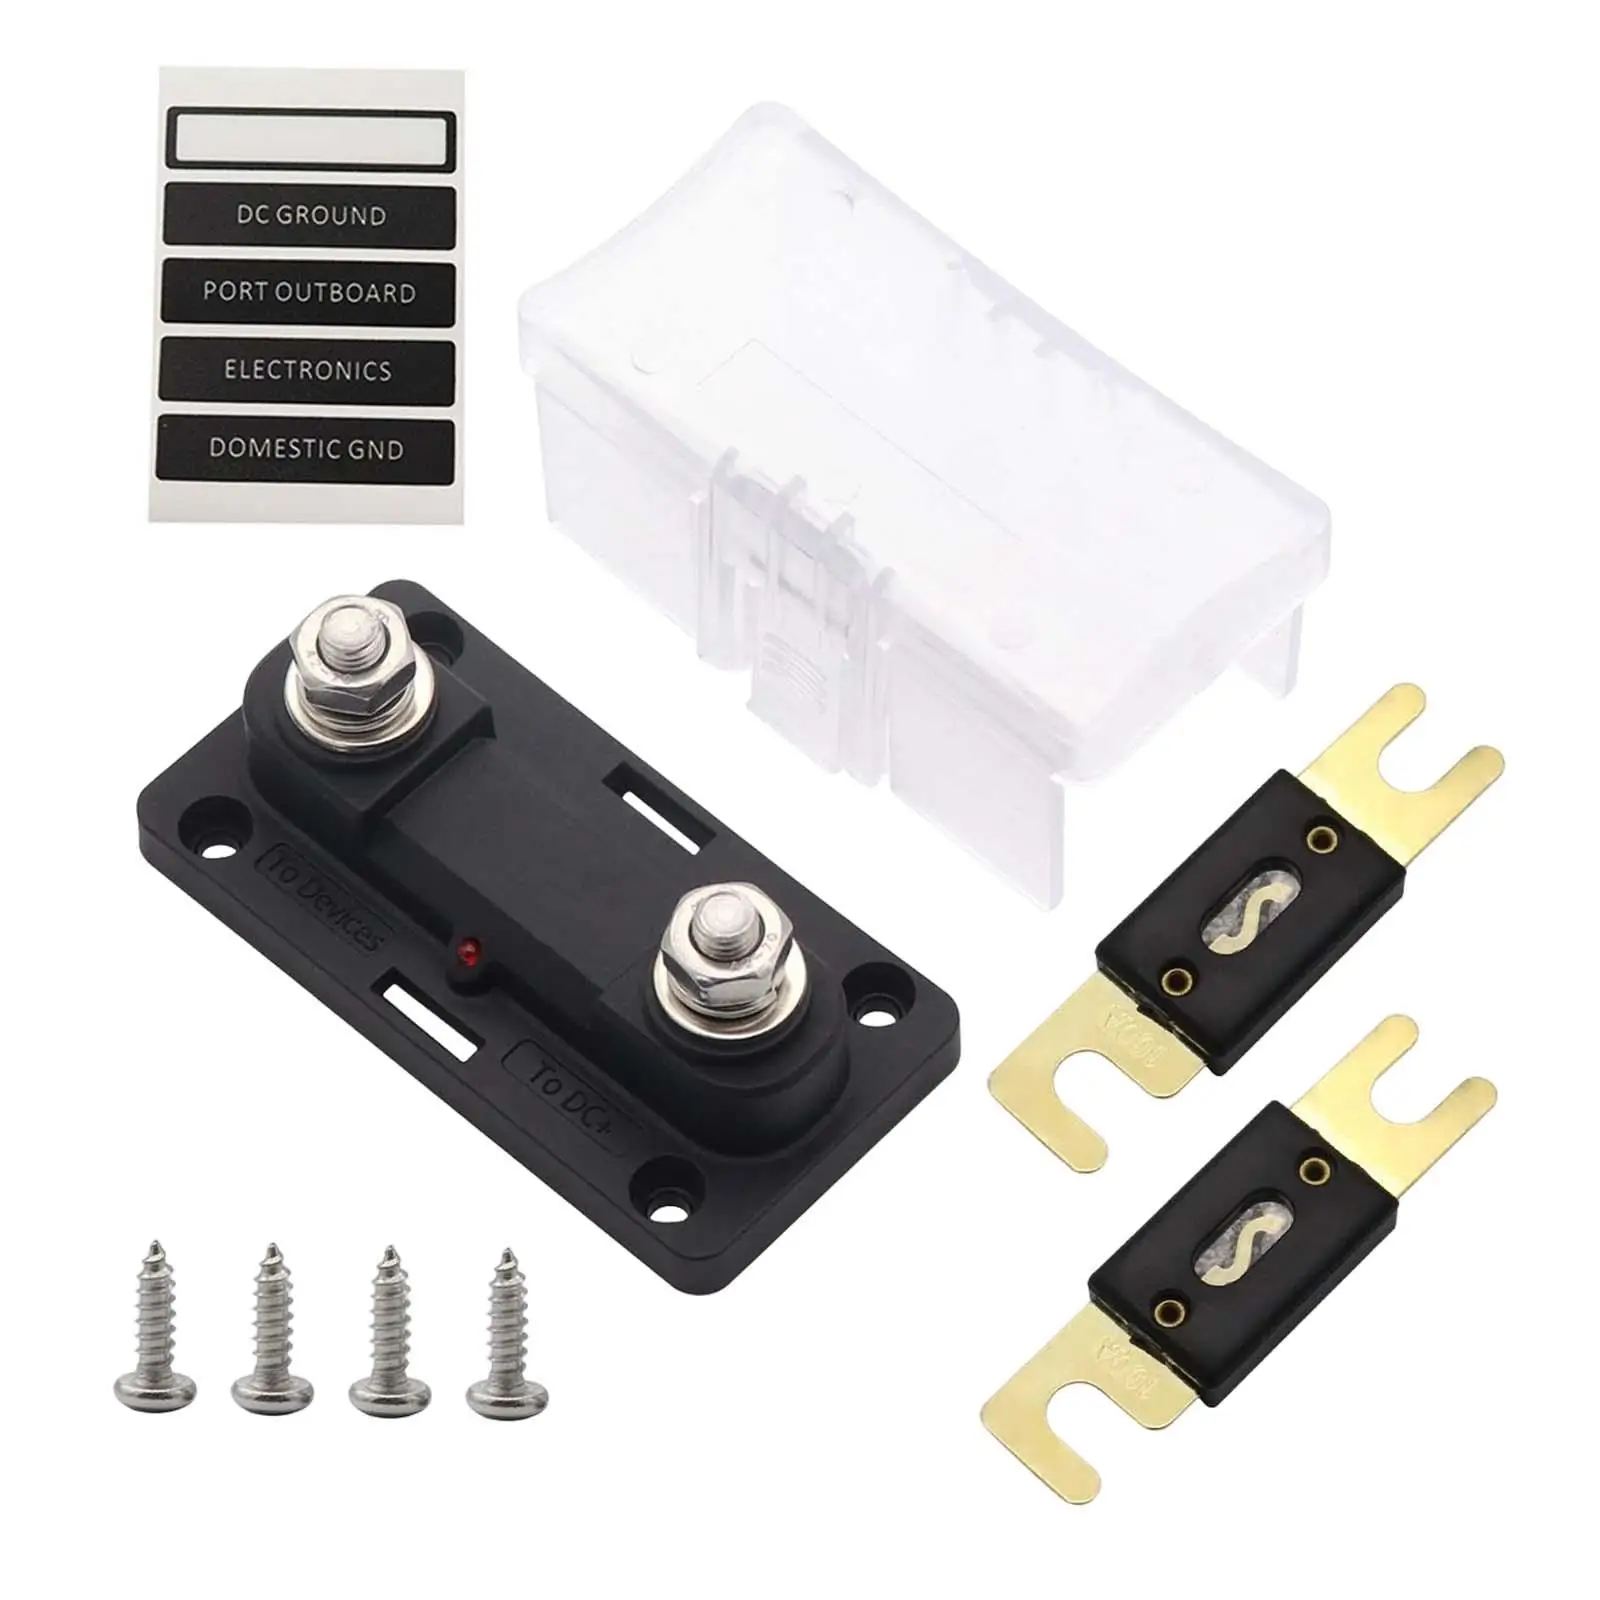 12V/24V Car Anl Fuse Holder with Fuses with Indicator Light M8 Stud Replace Parts Fuse Box for Vehicles boat Automotive